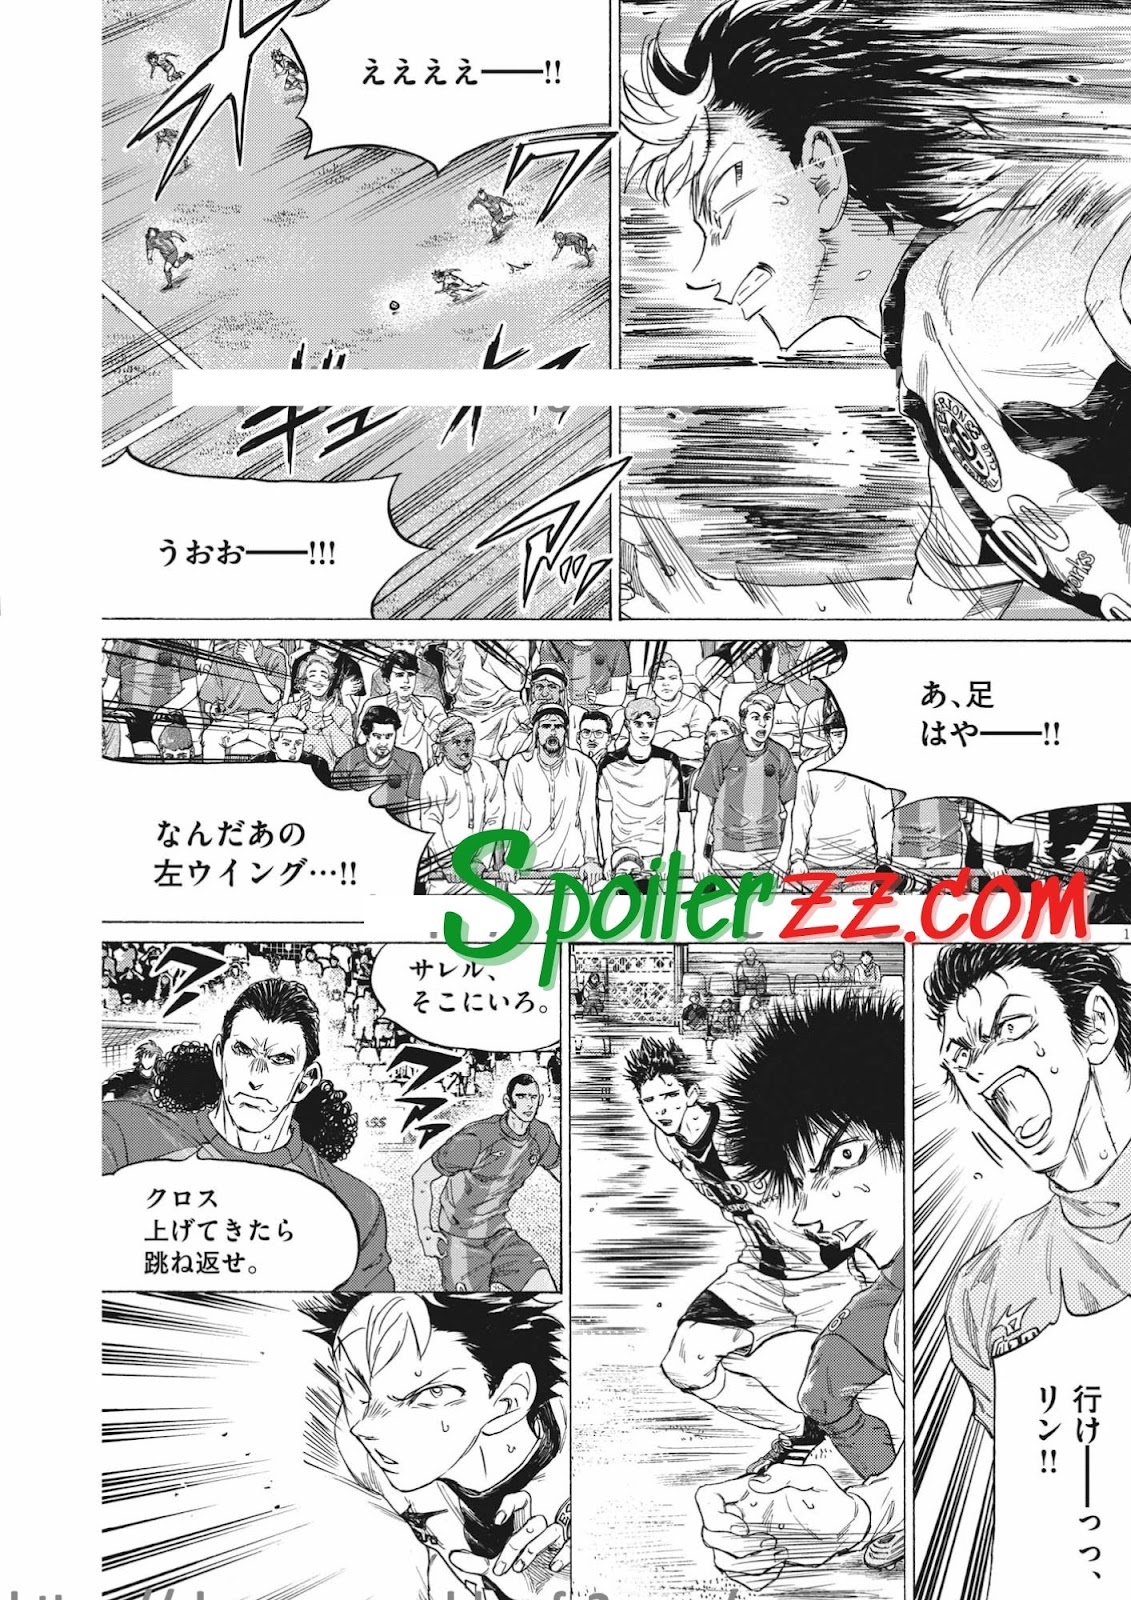 Ao Ashi Chapter 352 Spoiler, Release Date, Raw Scan, Countdown & More »  Amazfeed